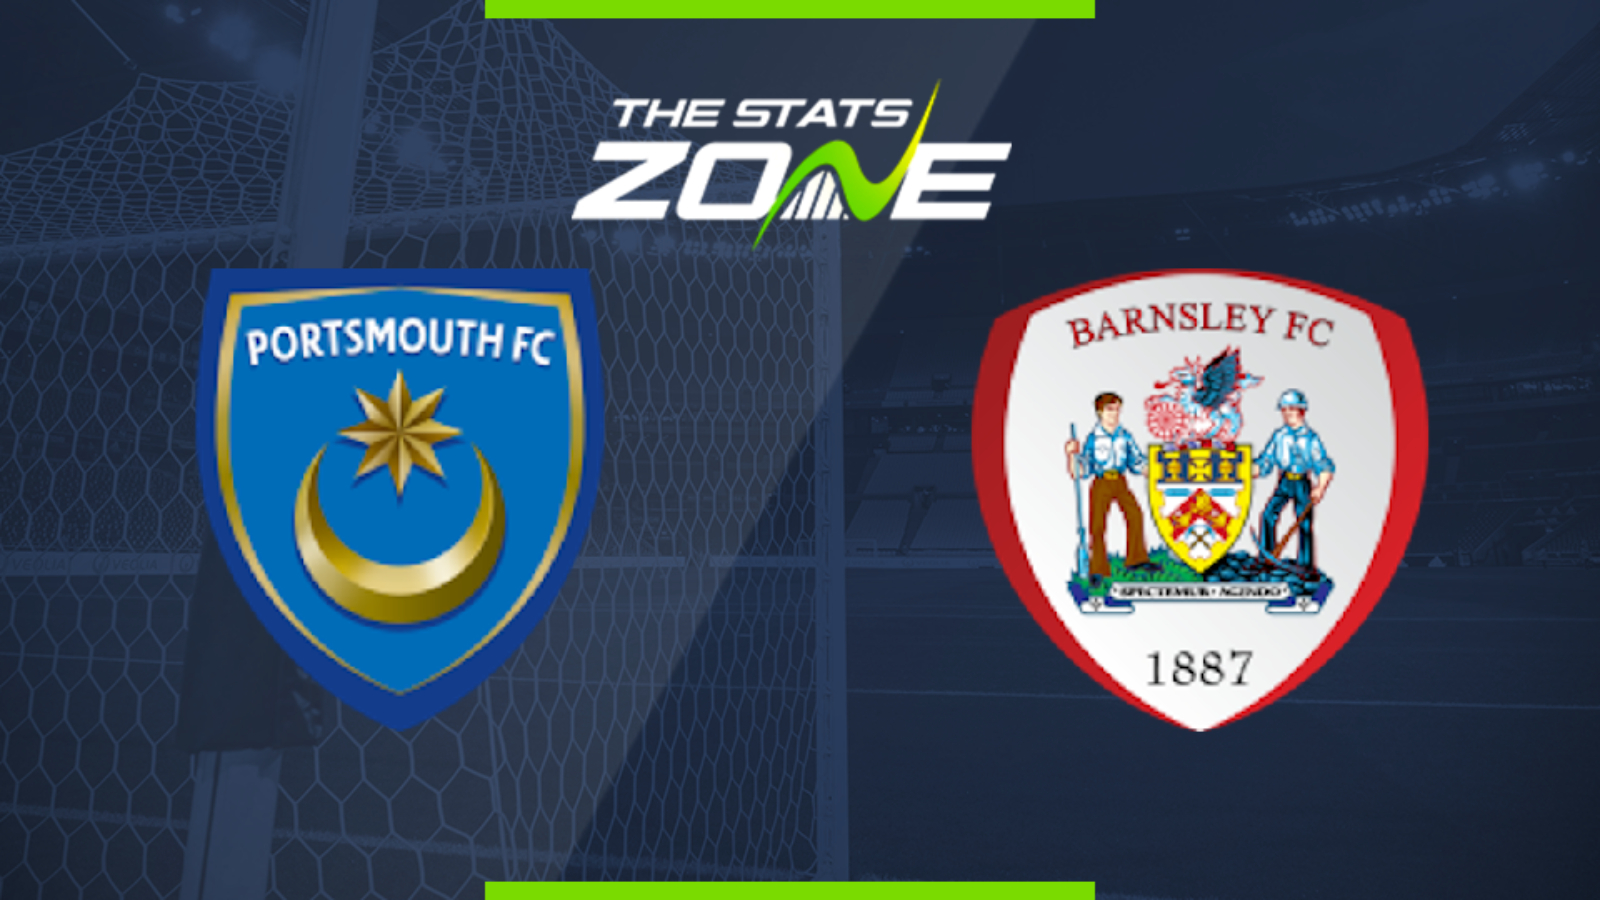 2019-20 FA Cup – Portsmouth vs Barnsley Preview & Prediction - The